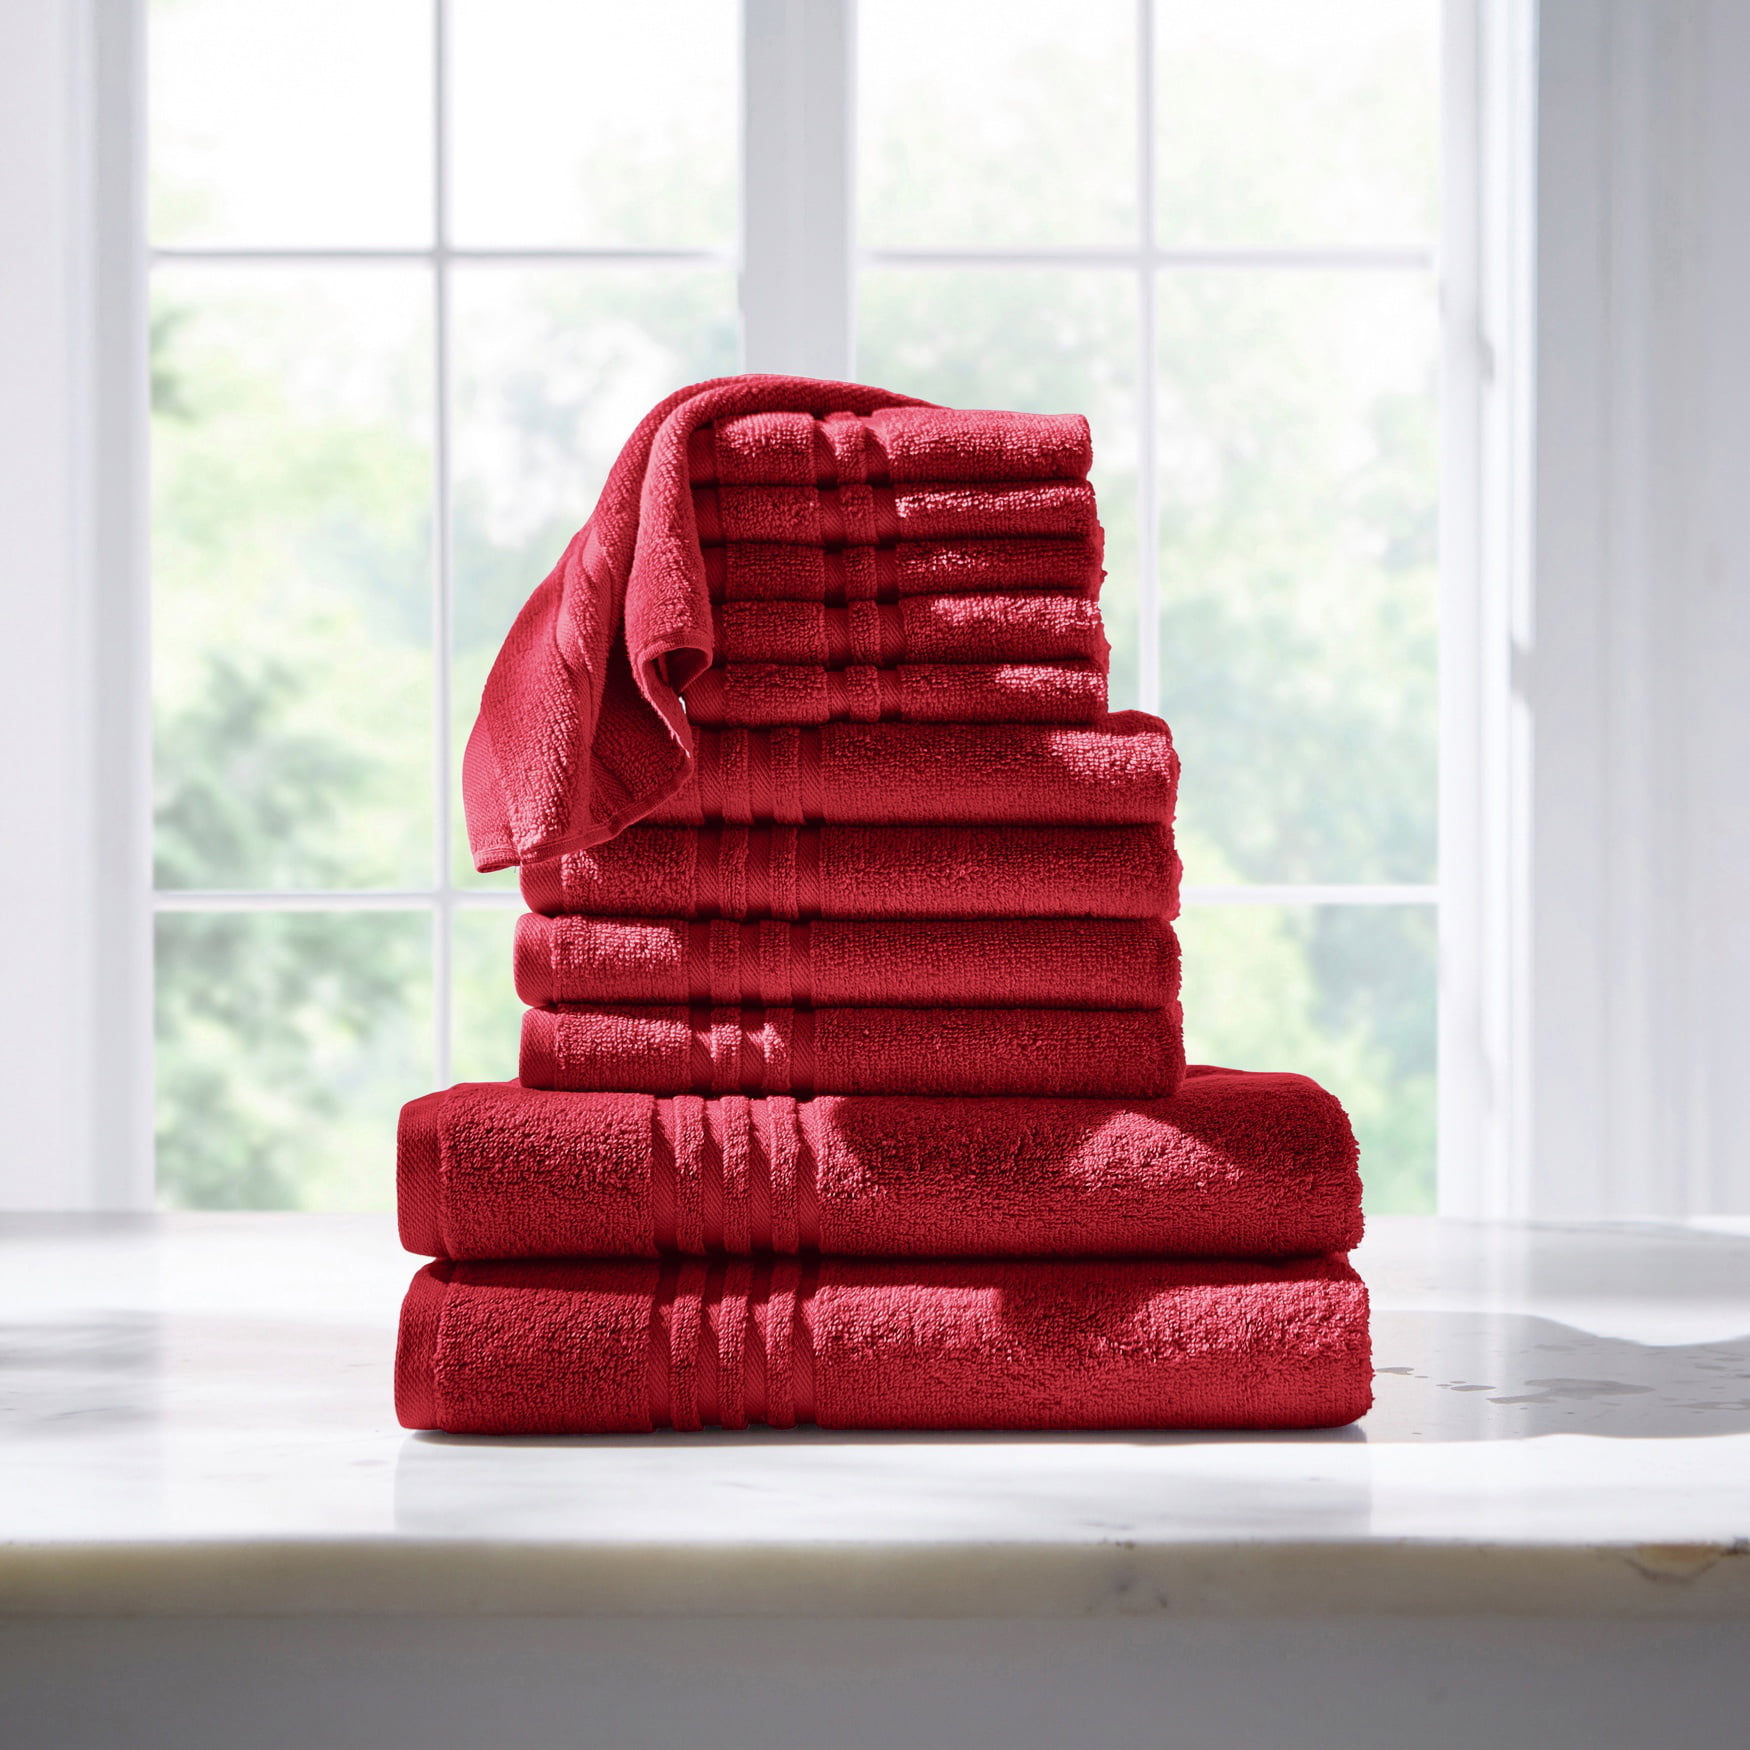 RED TOWEL 6 BALE PIECE 100% COTTON NEW 